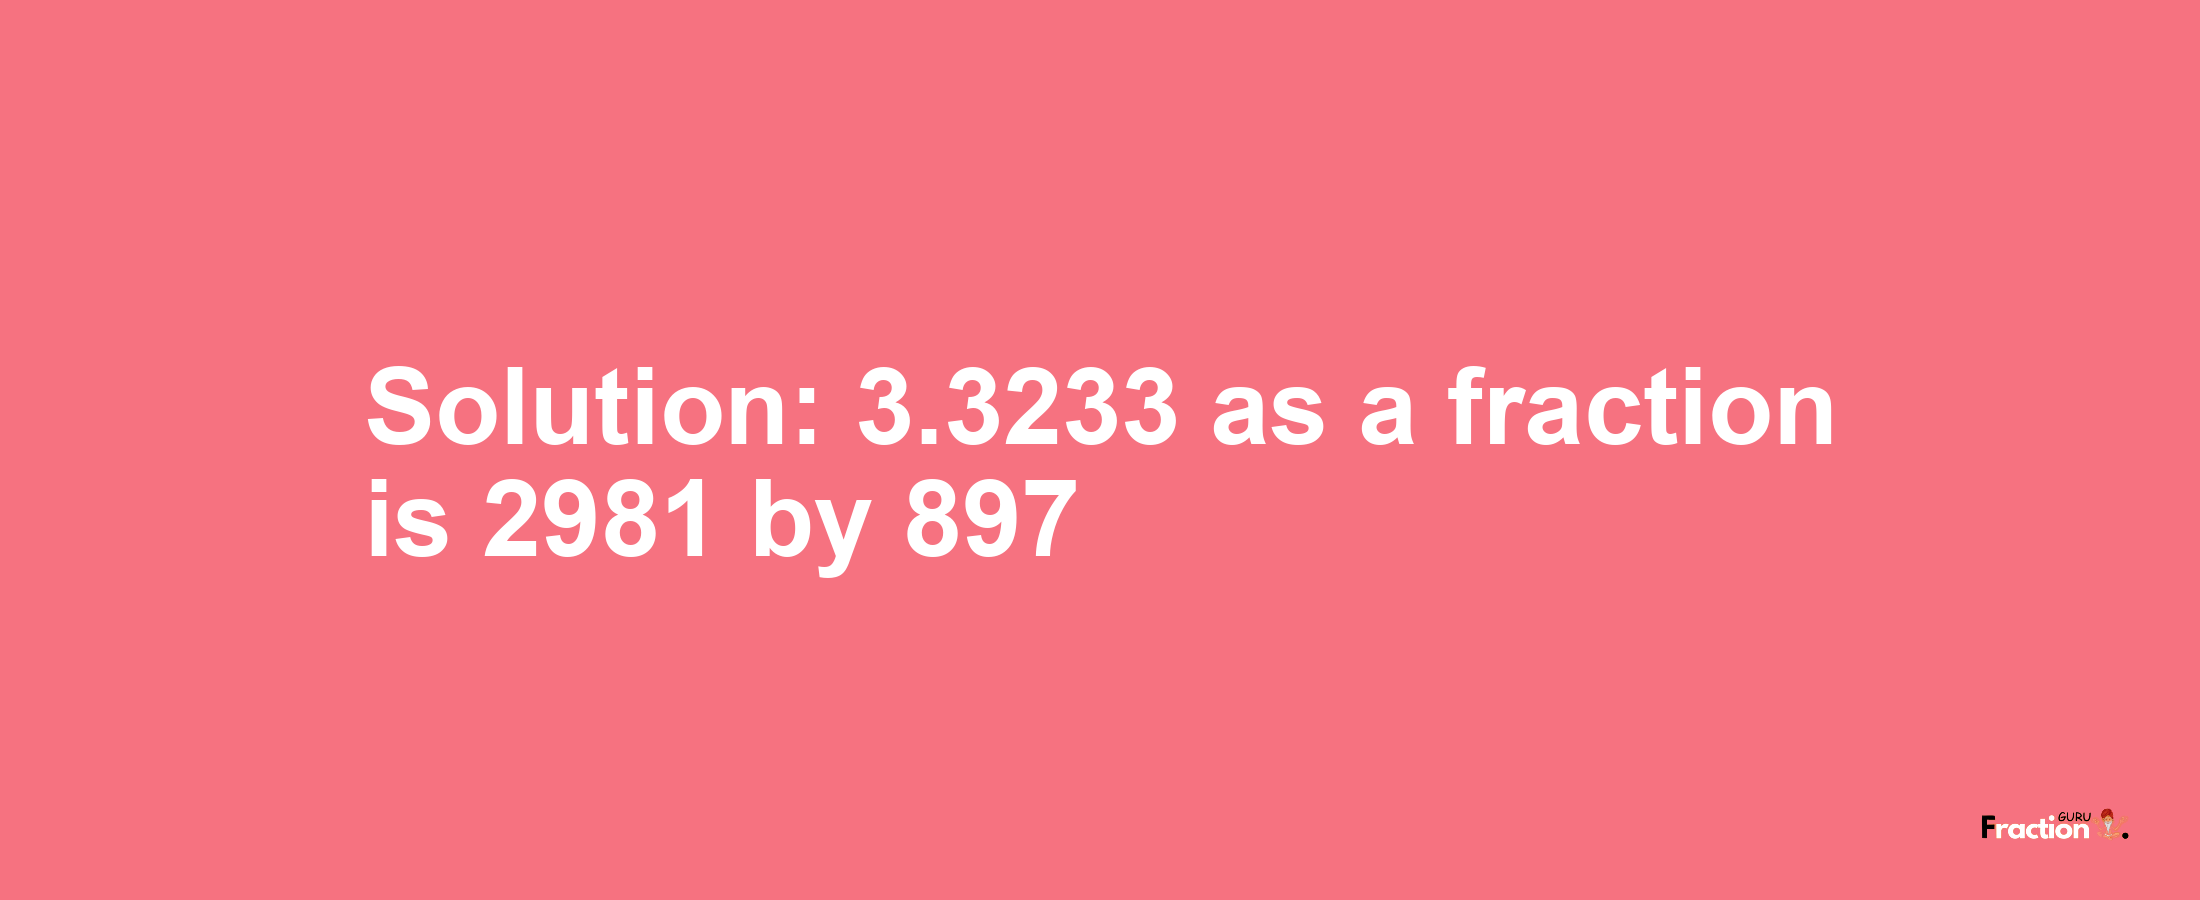 Solution:3.3233 as a fraction is 2981/897